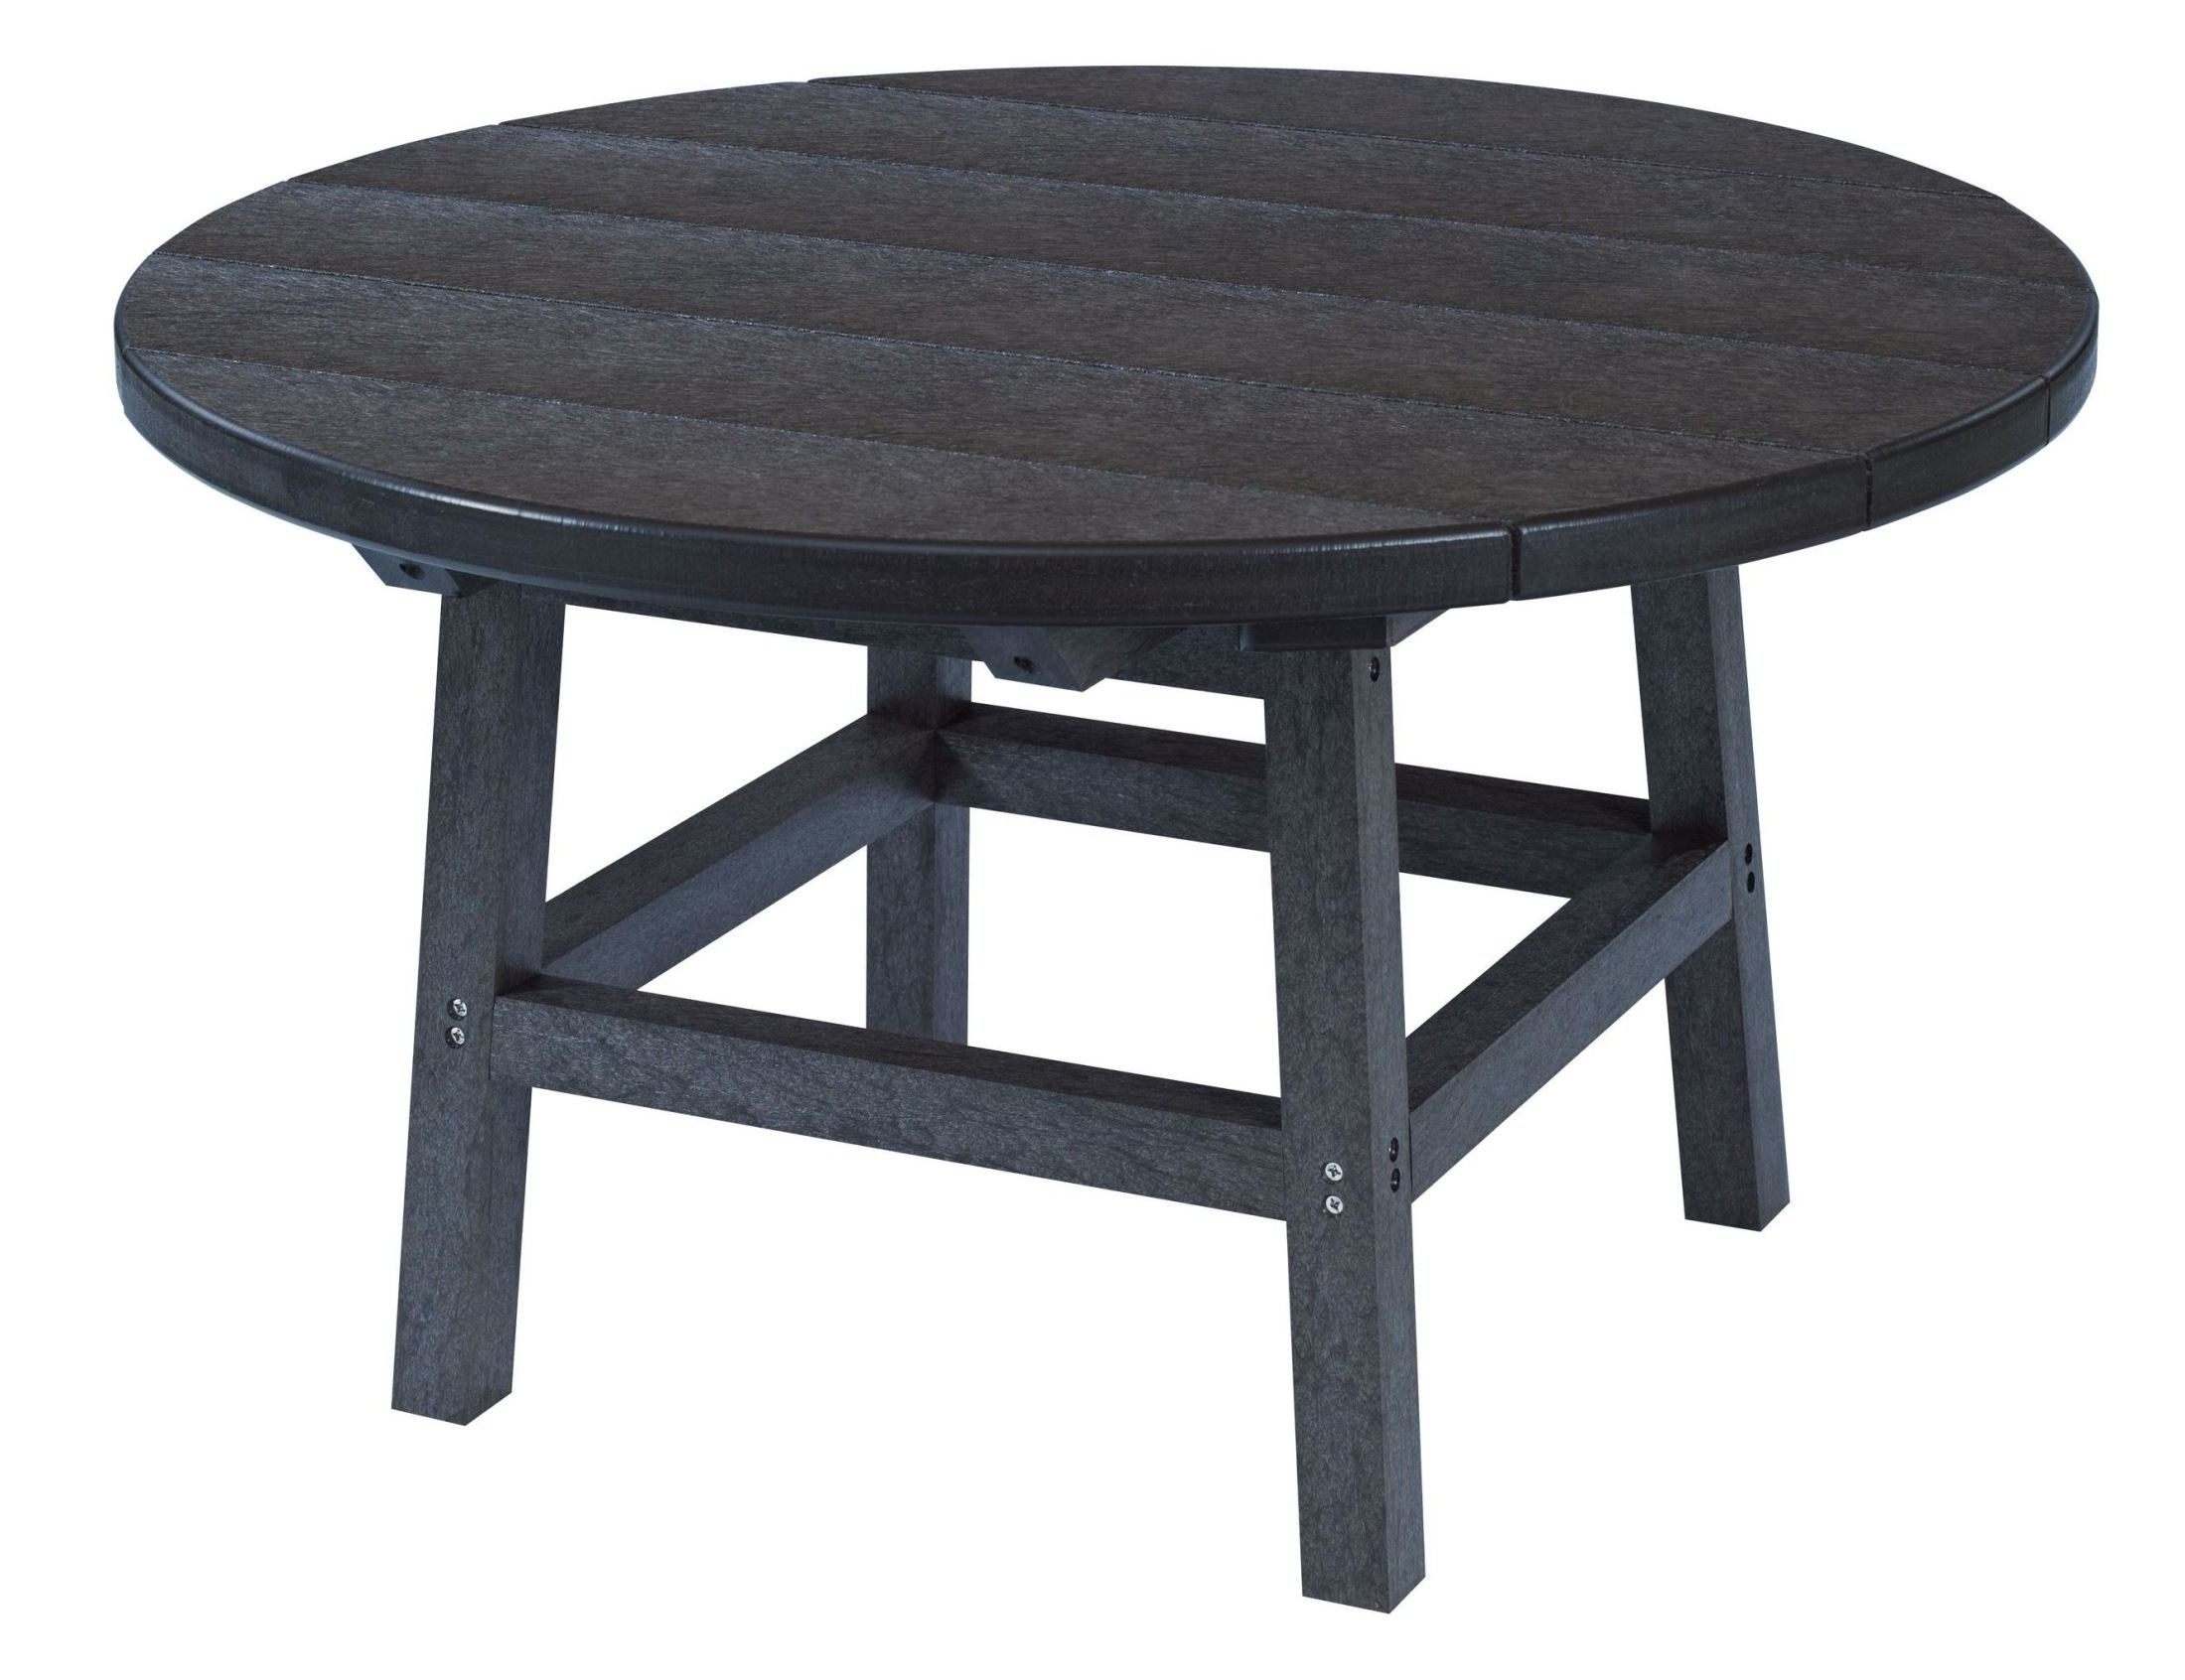 Barnside Round Cocktail Tables In 2020 Generations Black 32" Round Leg Cocktail Table From Cr Plastic (tbt (View 10 of 10)